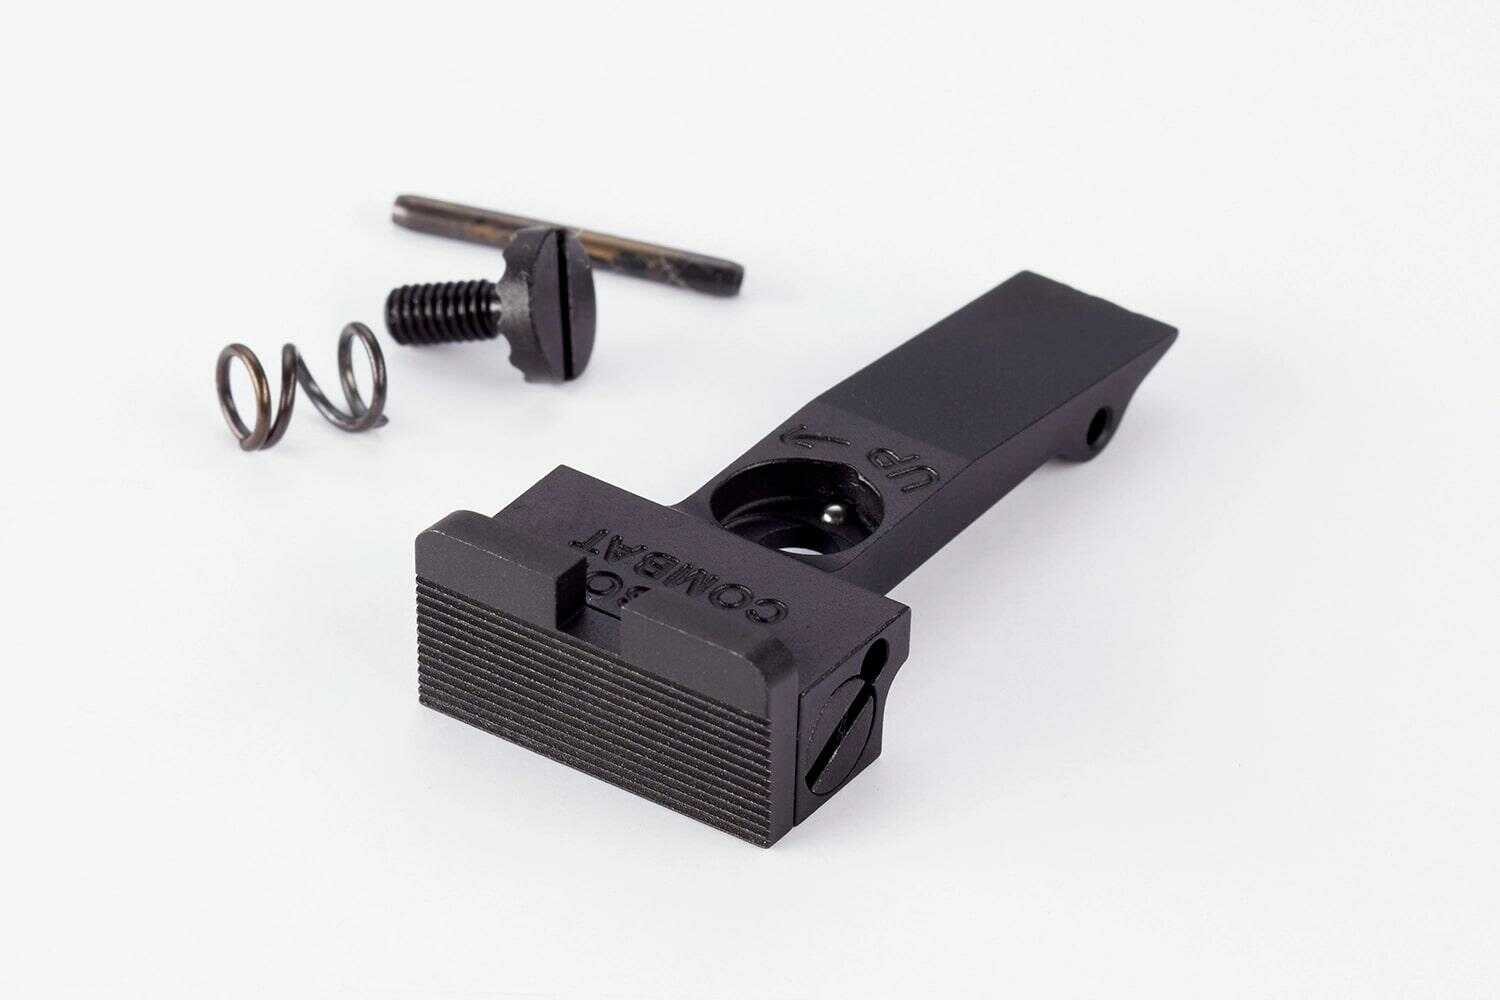 Wilson Combat Rear Sight For Colt 2020 Python/Anaconda Adjustable Serrated Blade Black With Square Notch